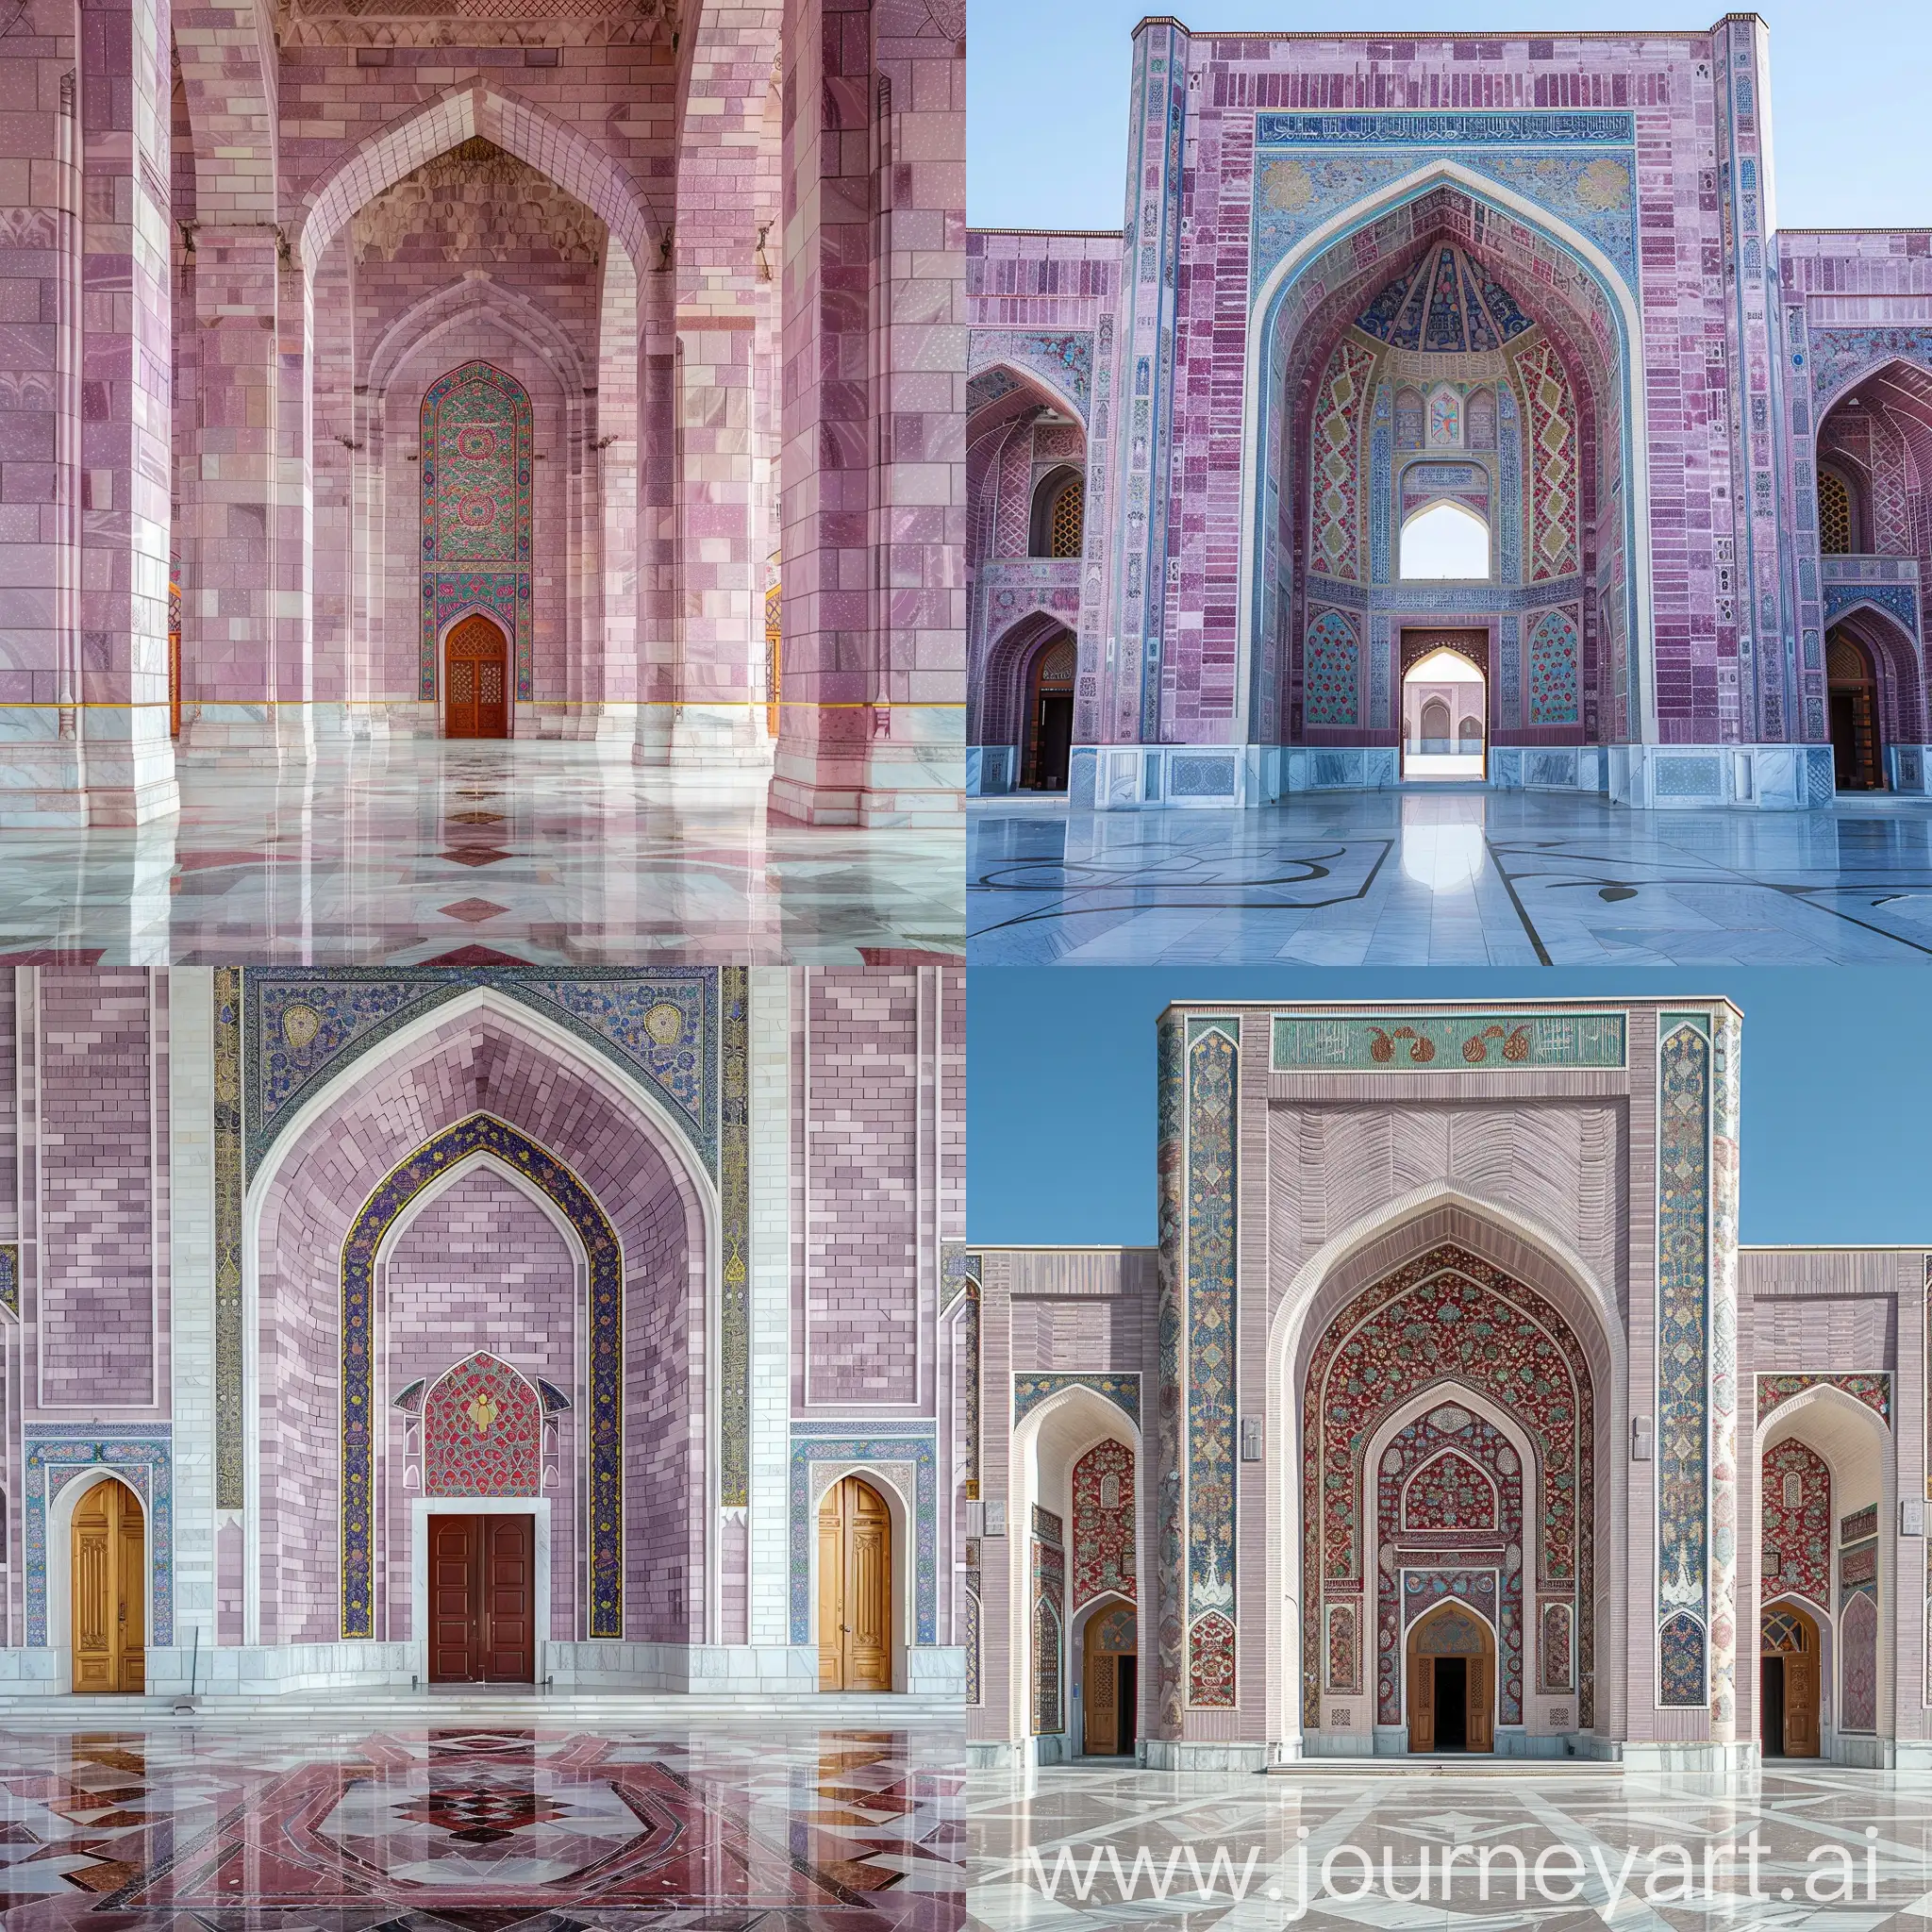 TimuridInfluenced-Lavender-Mosque-with-Persian-Design-and-Golden-Ornaments